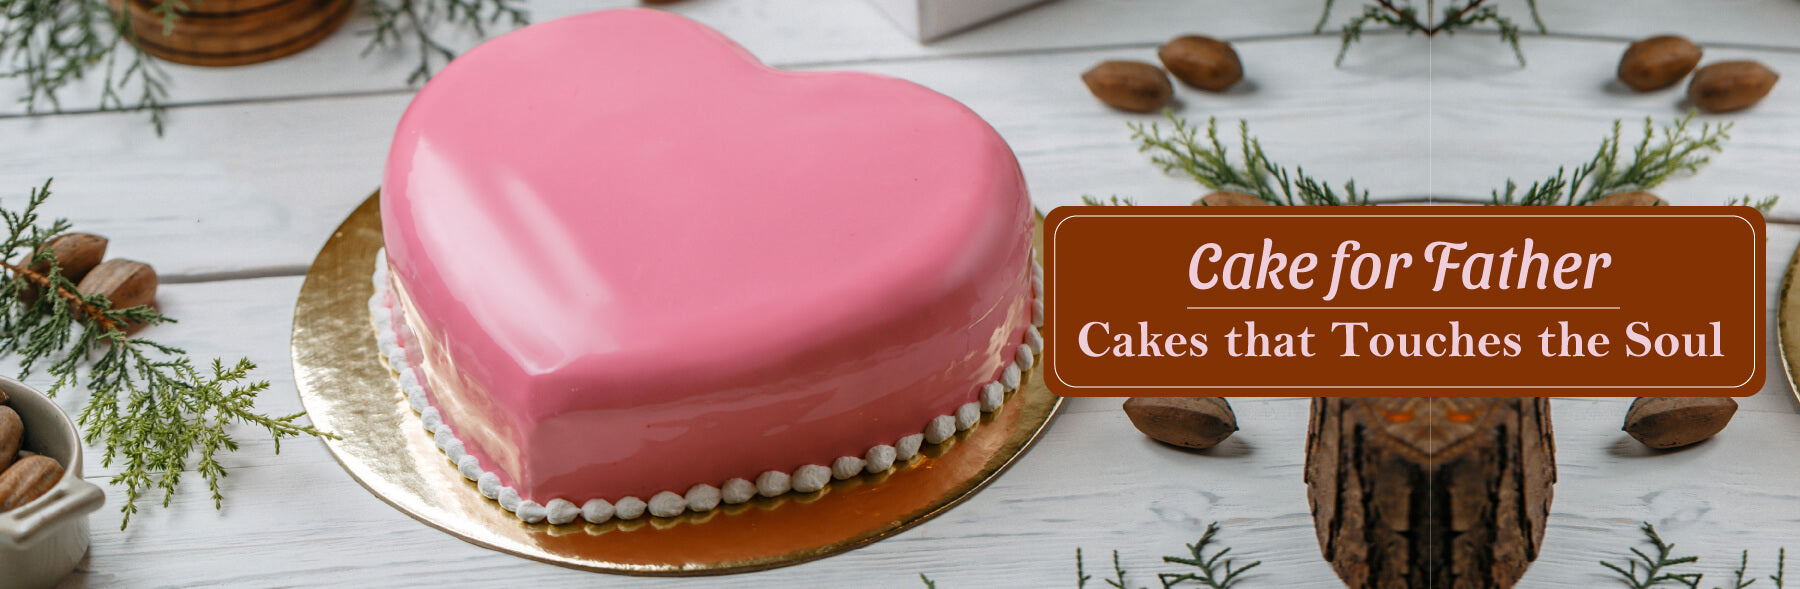 Father Special Cake Delivery In Delhi And Noida